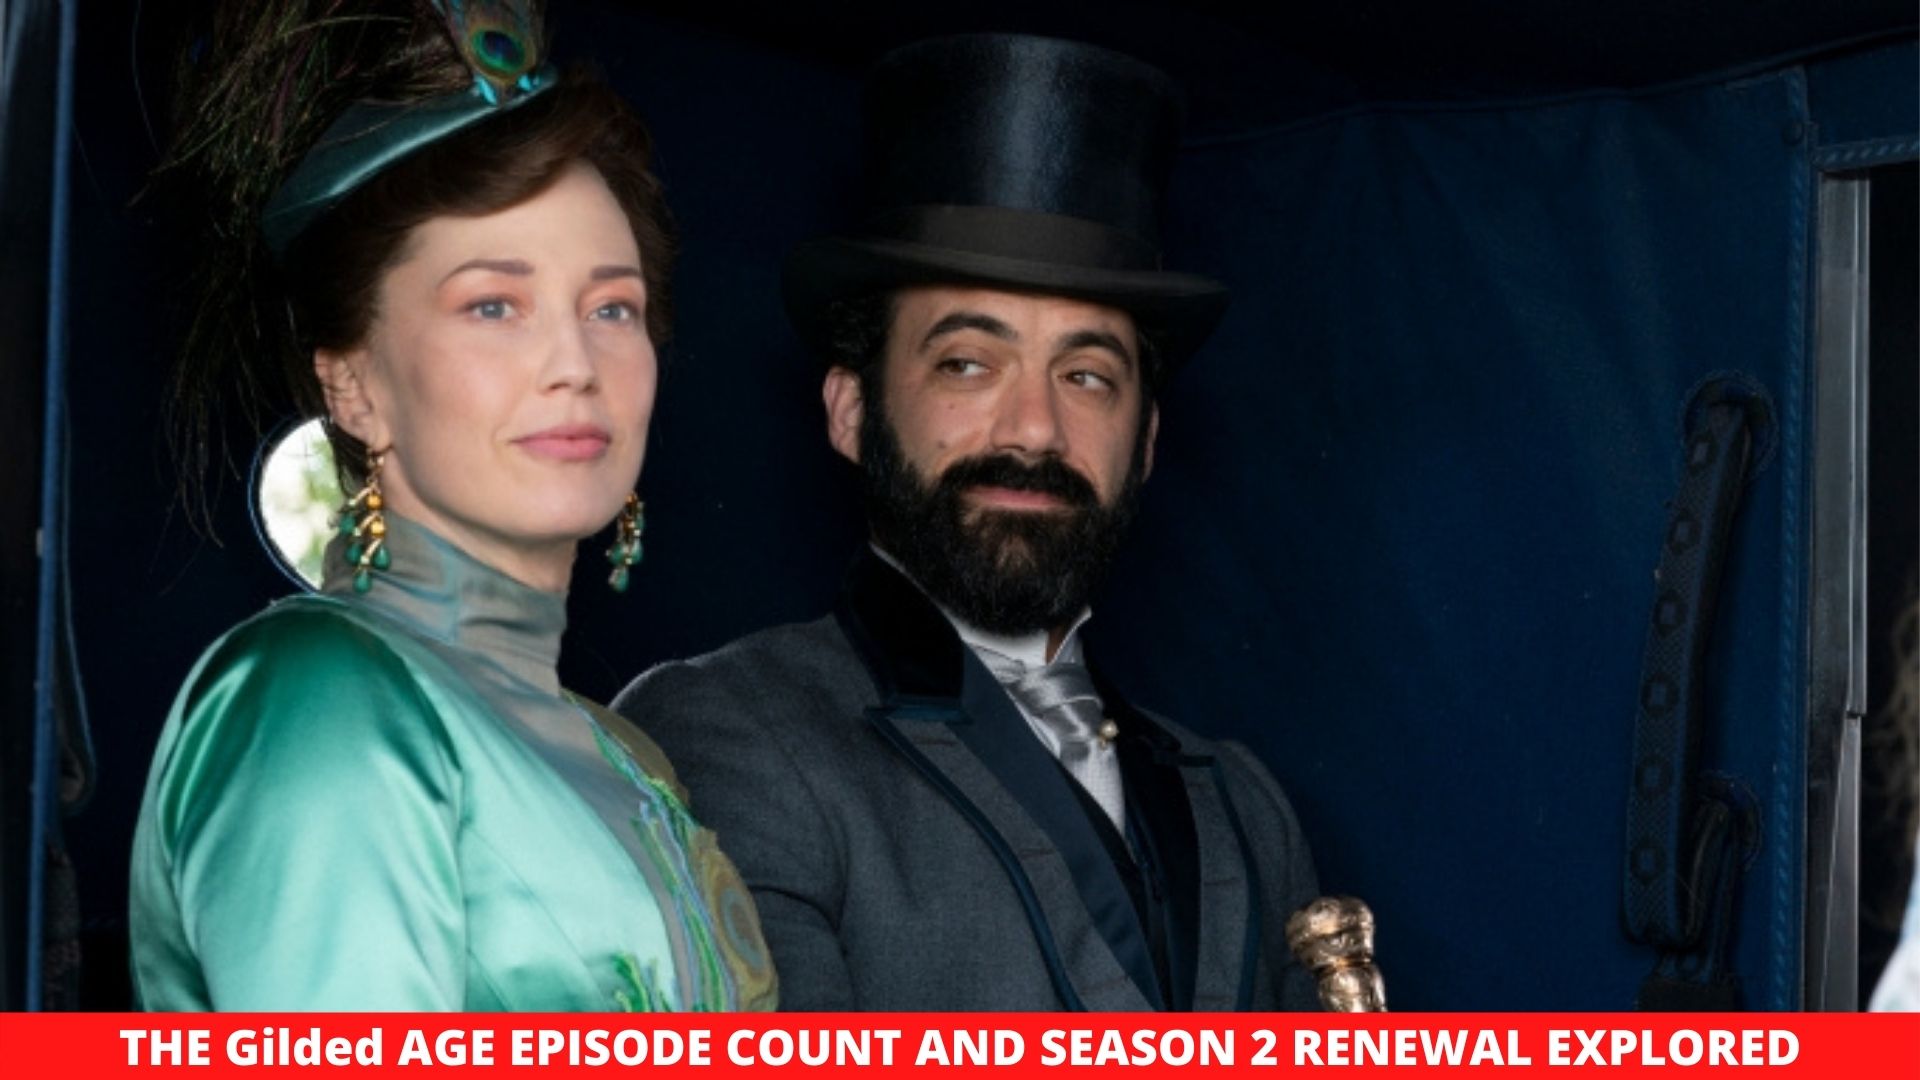 THE Gilded AGE EPISODE COUNT AND SEASON 2 RENEWAL EXPLORED